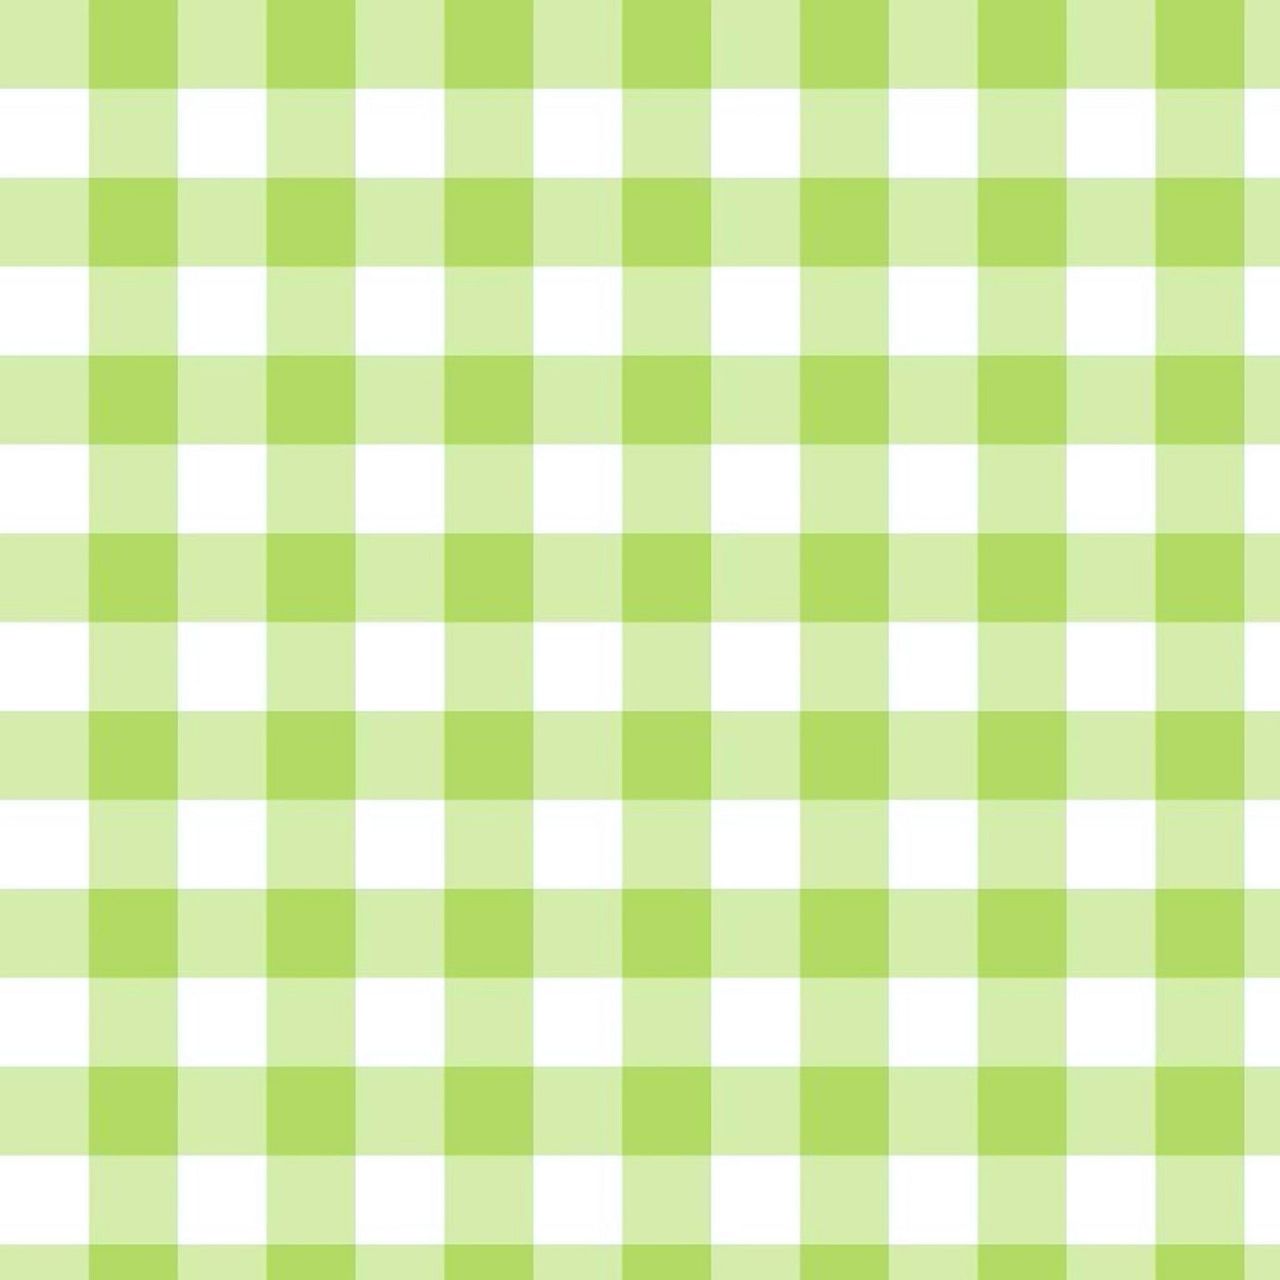 Green gingham pattern for your project - Pattern, Keroppi